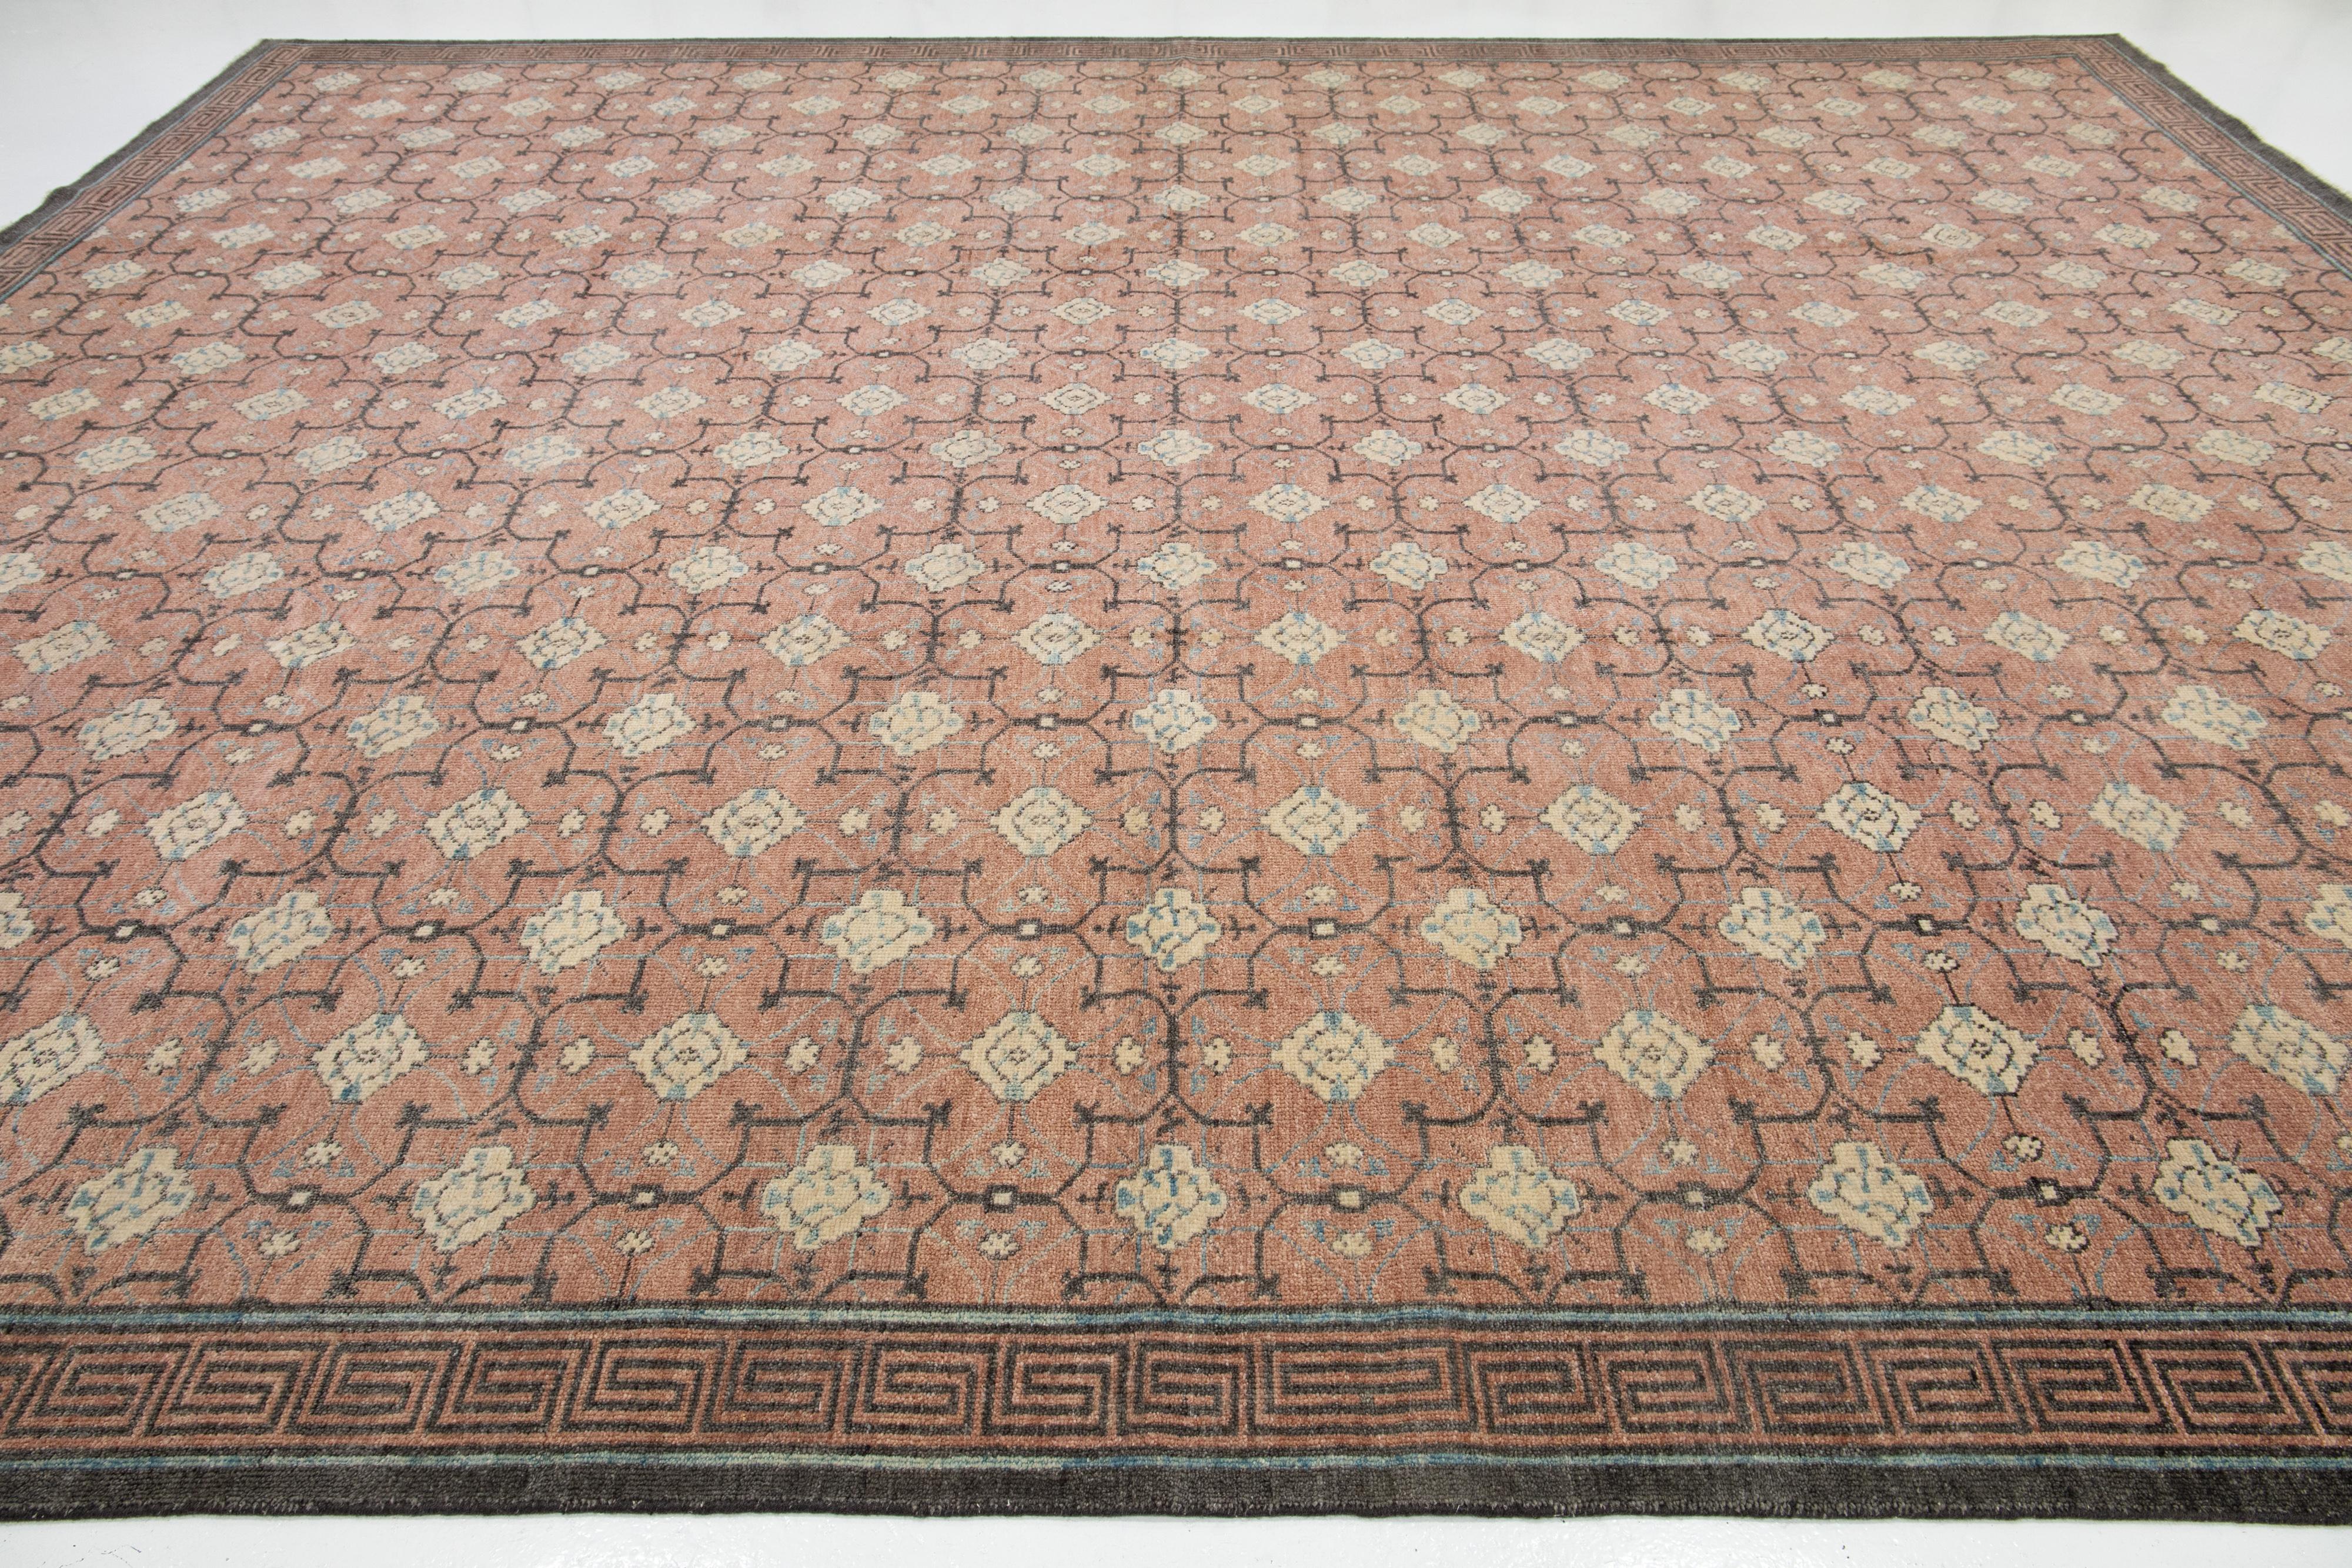 Handmade Khotan Style Modern Wool Rug With Geometric Design In Brown In New Condition For Sale In Norwalk, CT